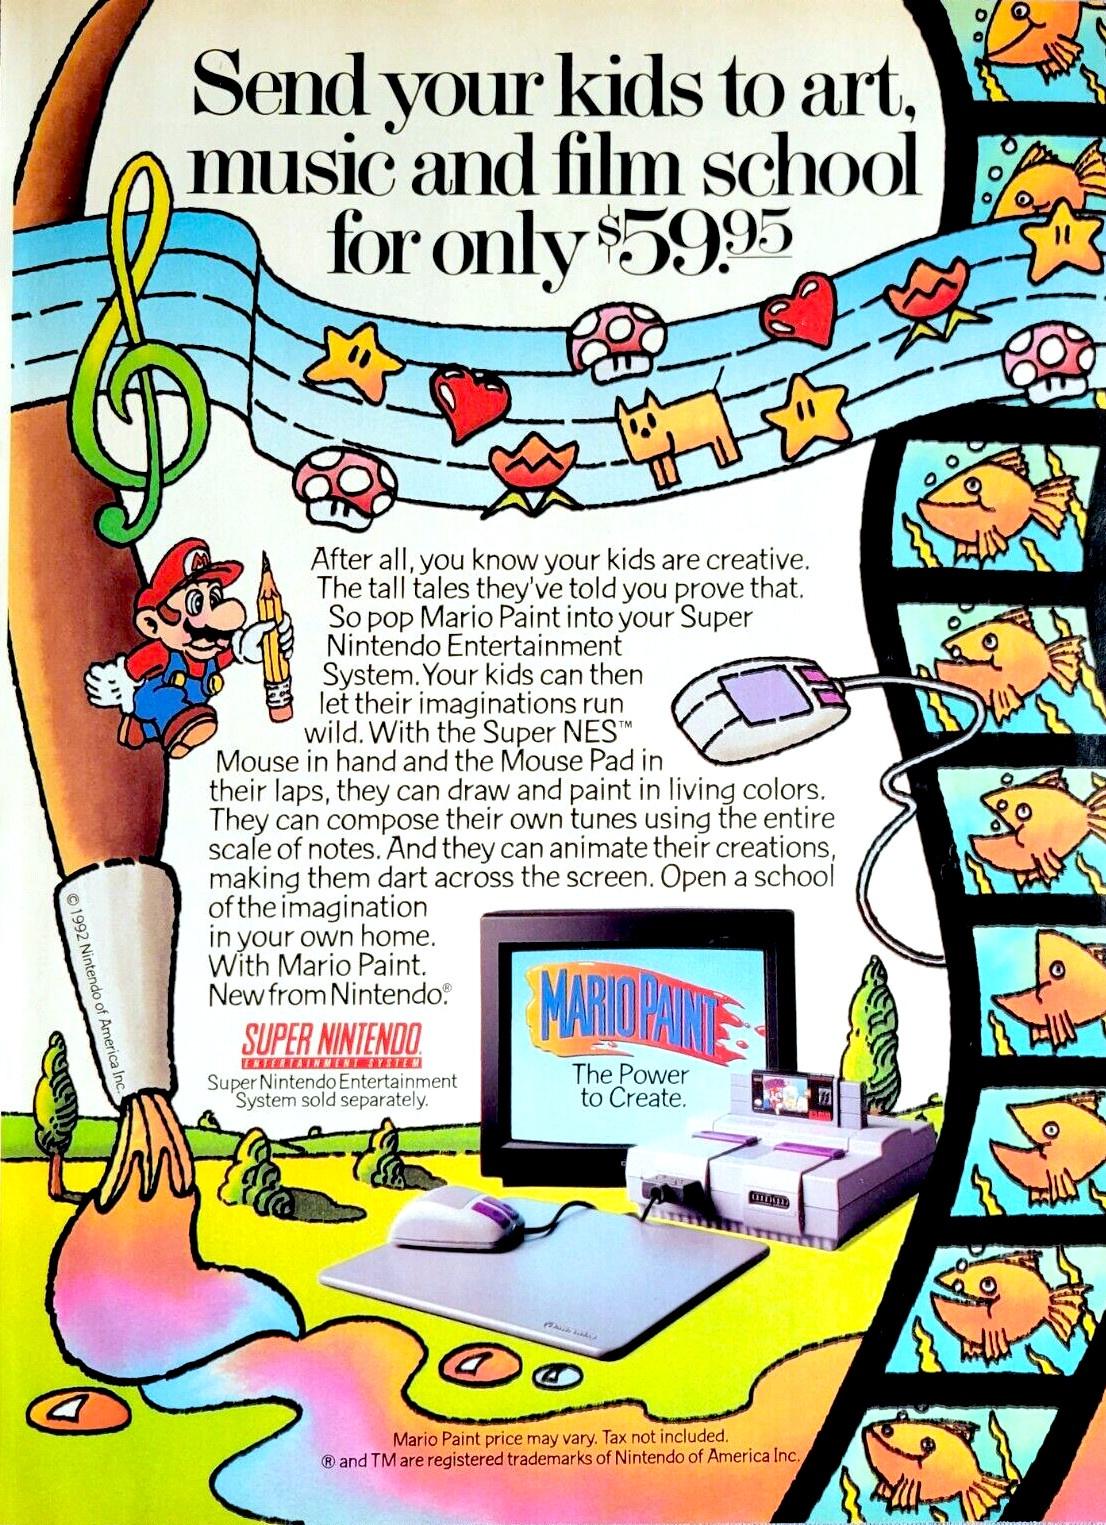 Mario Paint – advert in videogames journal from the early ’90s (SNES)